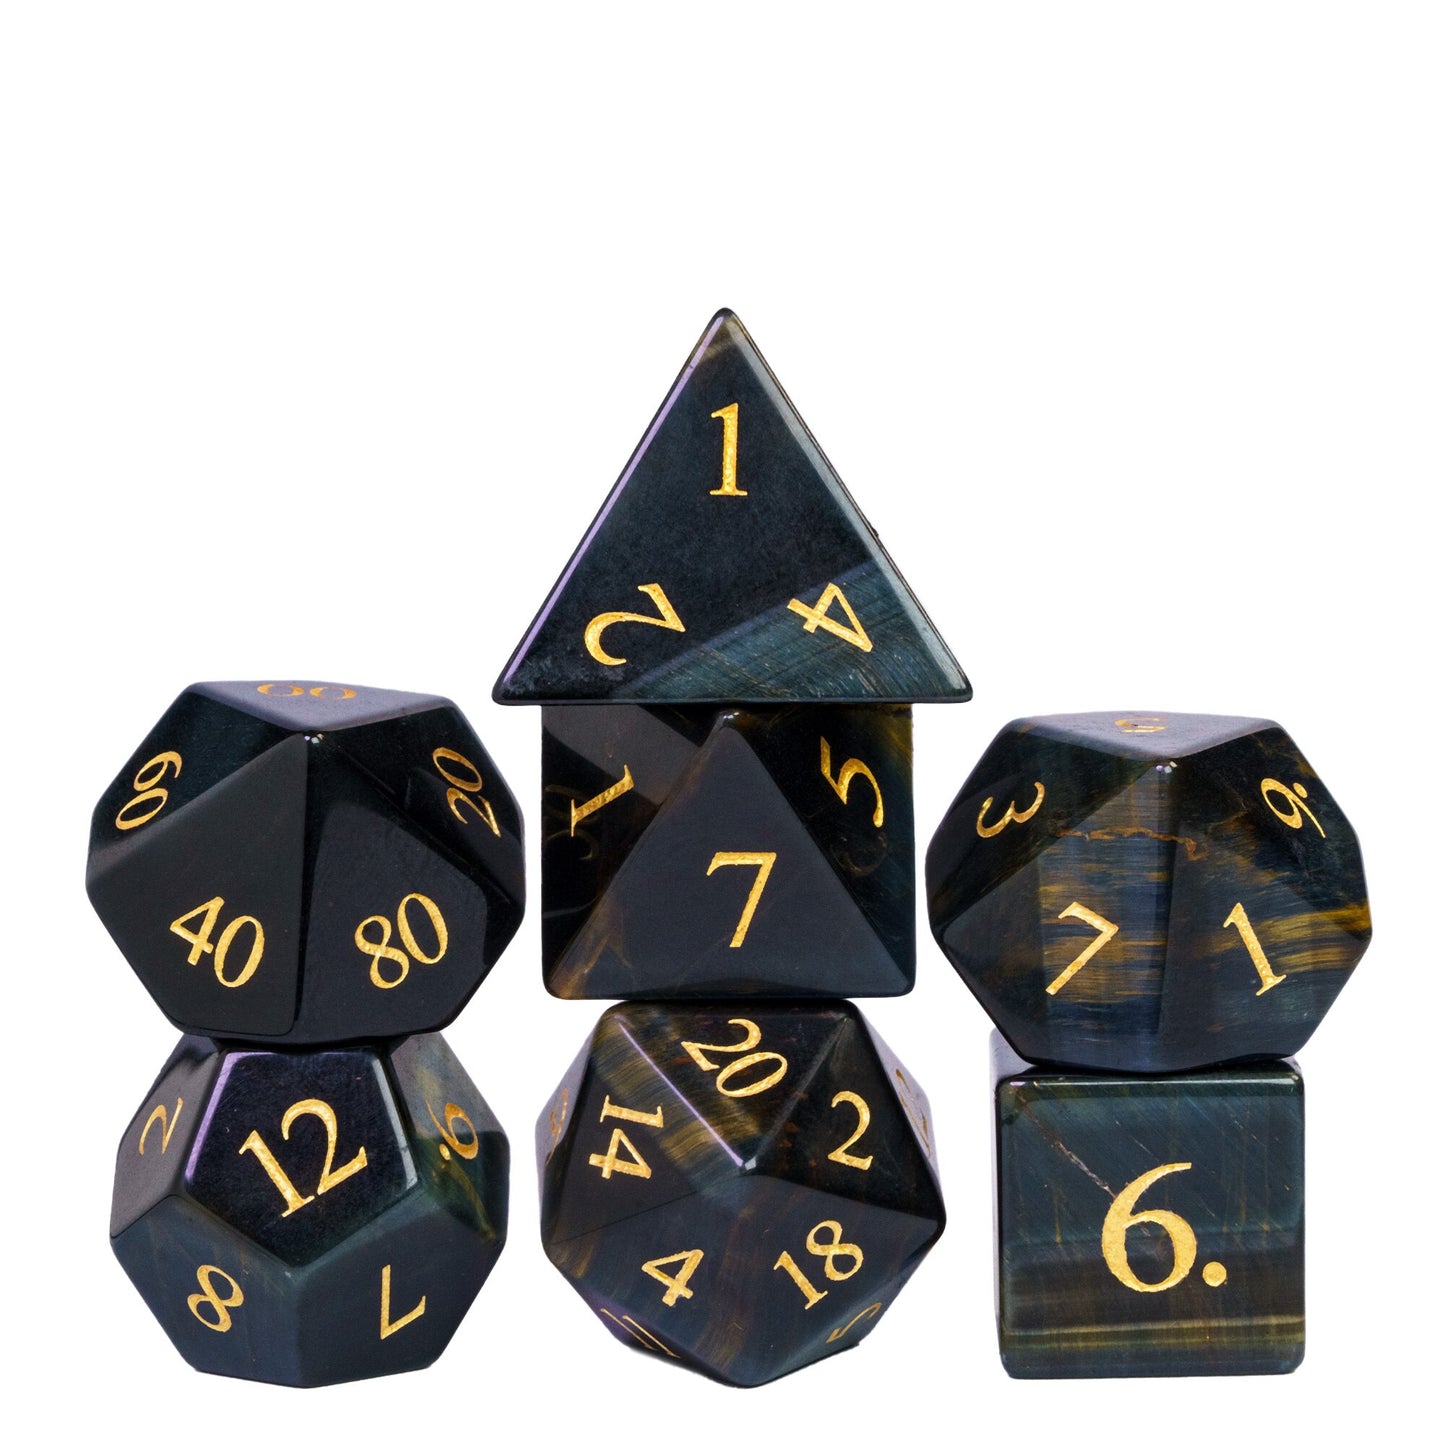 Dark blue and black stacked stone dice set